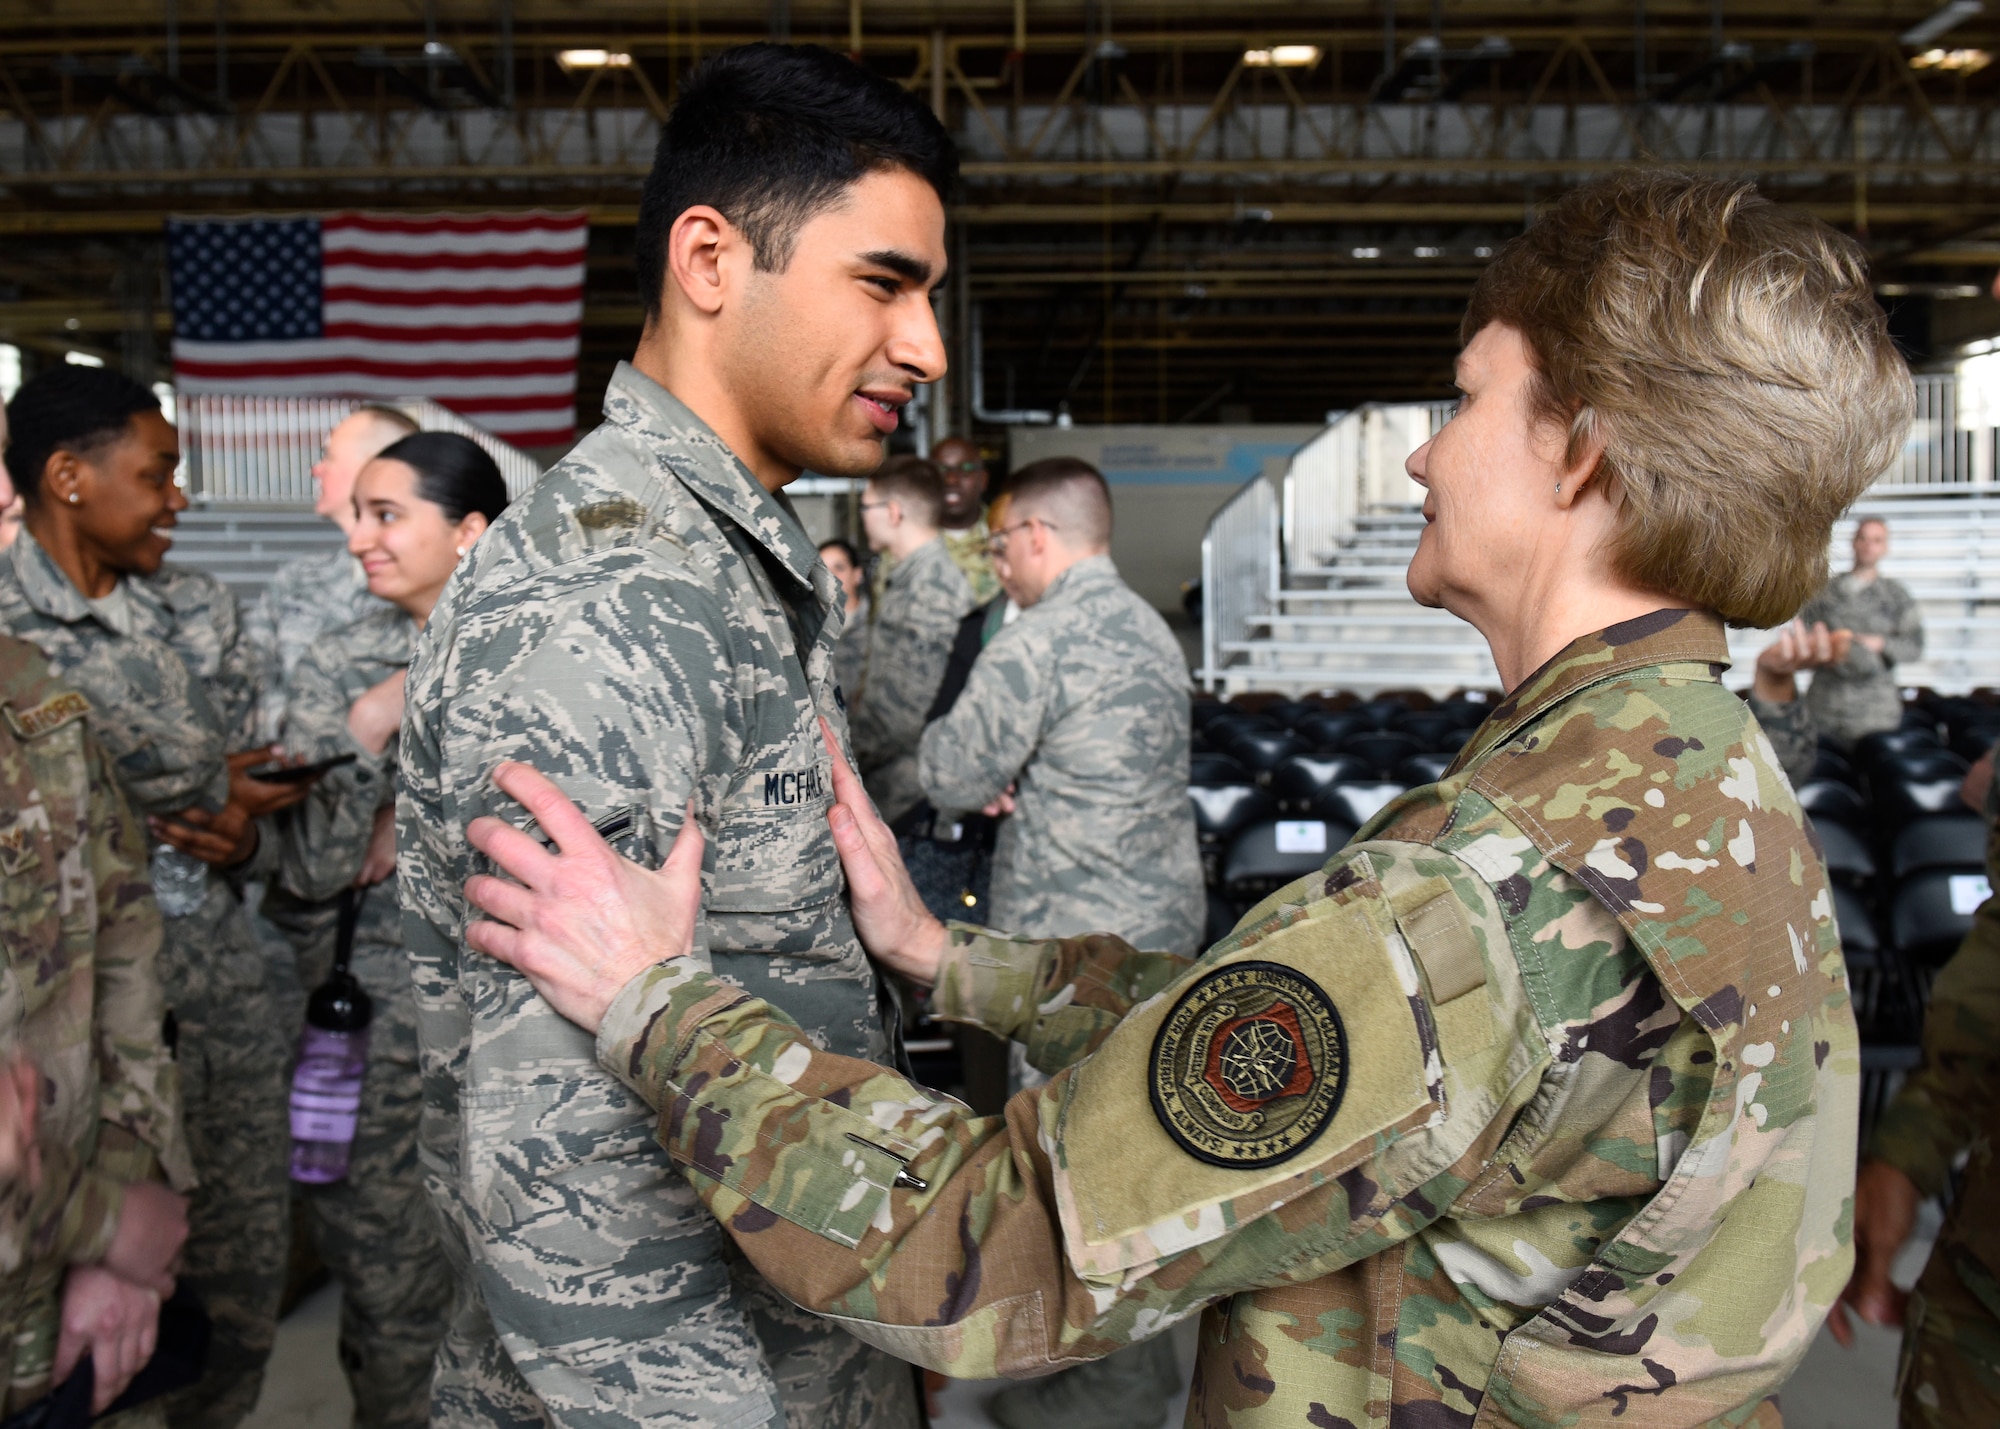 U.S. Air Force Gen. Maryanne Miller, Air Mobility Command commander, speaks with U.S. Air Force Airman Sean McFarlene, 92nd Maintenance Squadron isochronal crew chief, after an all-call at Fairchild Air Force Base, Washington, March 28, 2019. After addressing the challenges and concerns of Airmen, Miller took time for Fairchild Airmen to meet and speak with her one-on-one. (U.S. Air Force photo by Airman 1st Class Lawrence Sena)